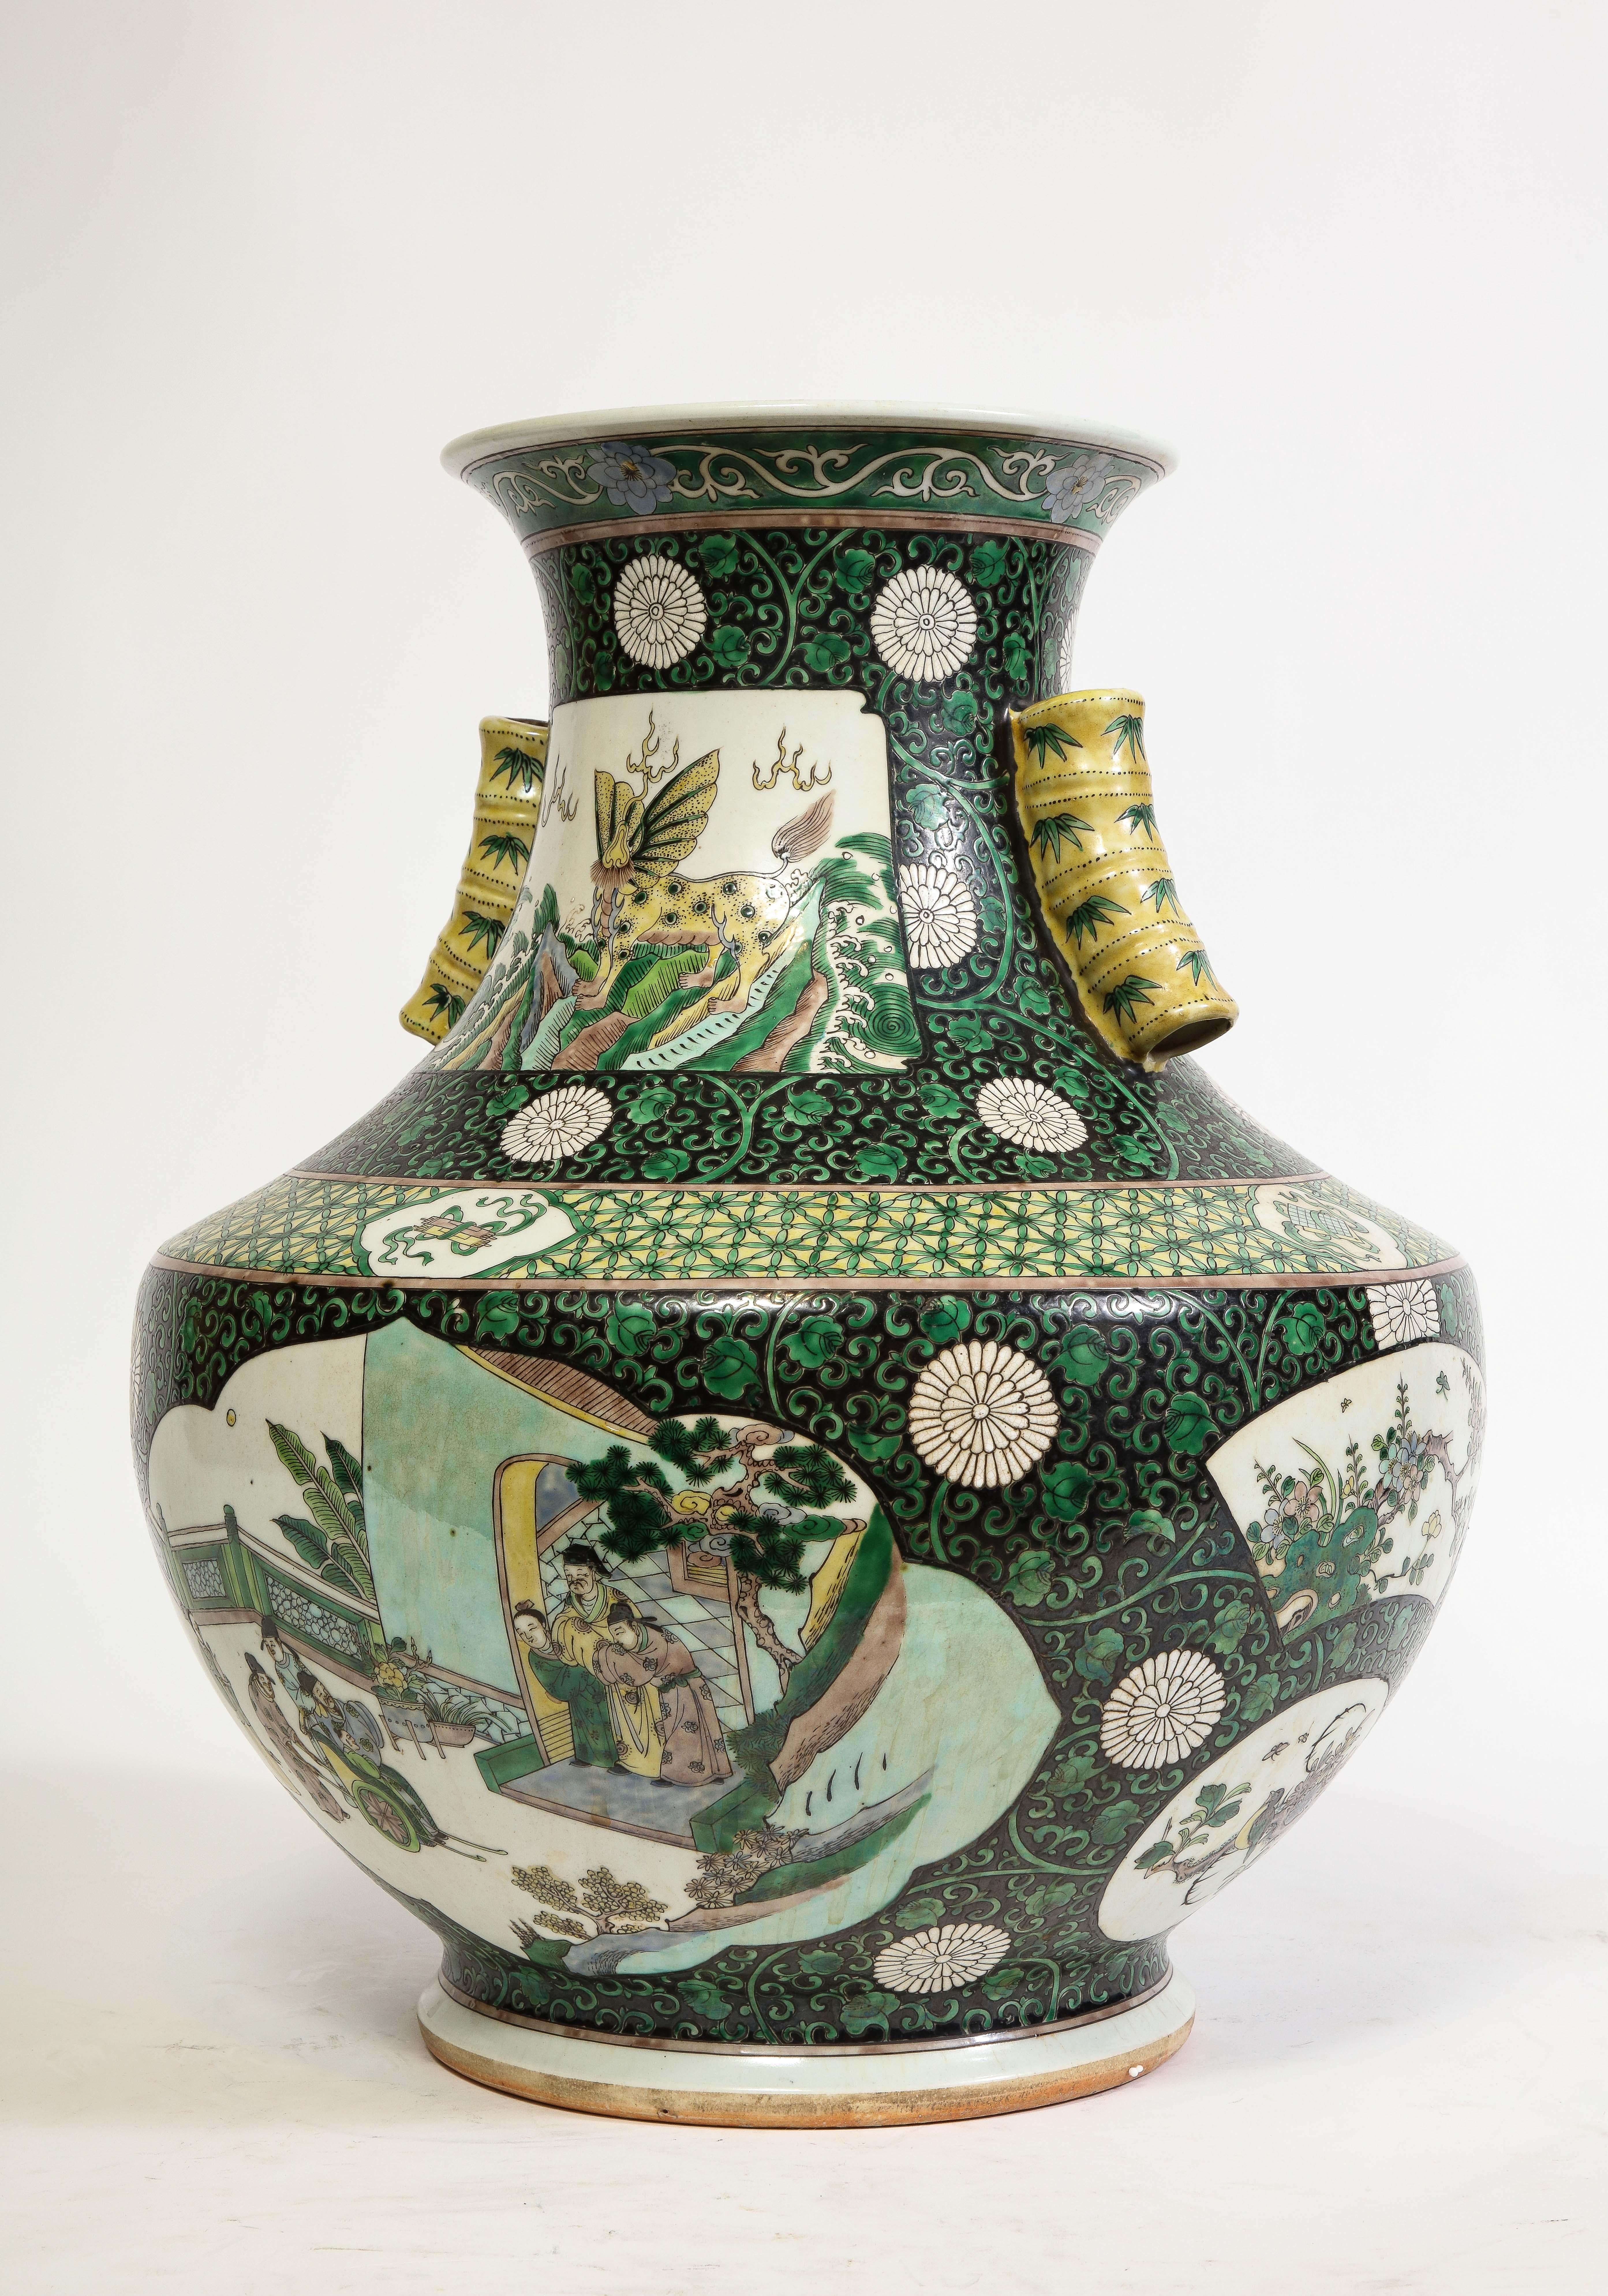 An Unusual Chinese Famille Vert Porcelain Vase with Bamboo Handles  The white stylized cloud-like section on the main body of the vase features a stunning hand-painted scene in yellow green, black, and green hues, depicting a gathering of dynamic